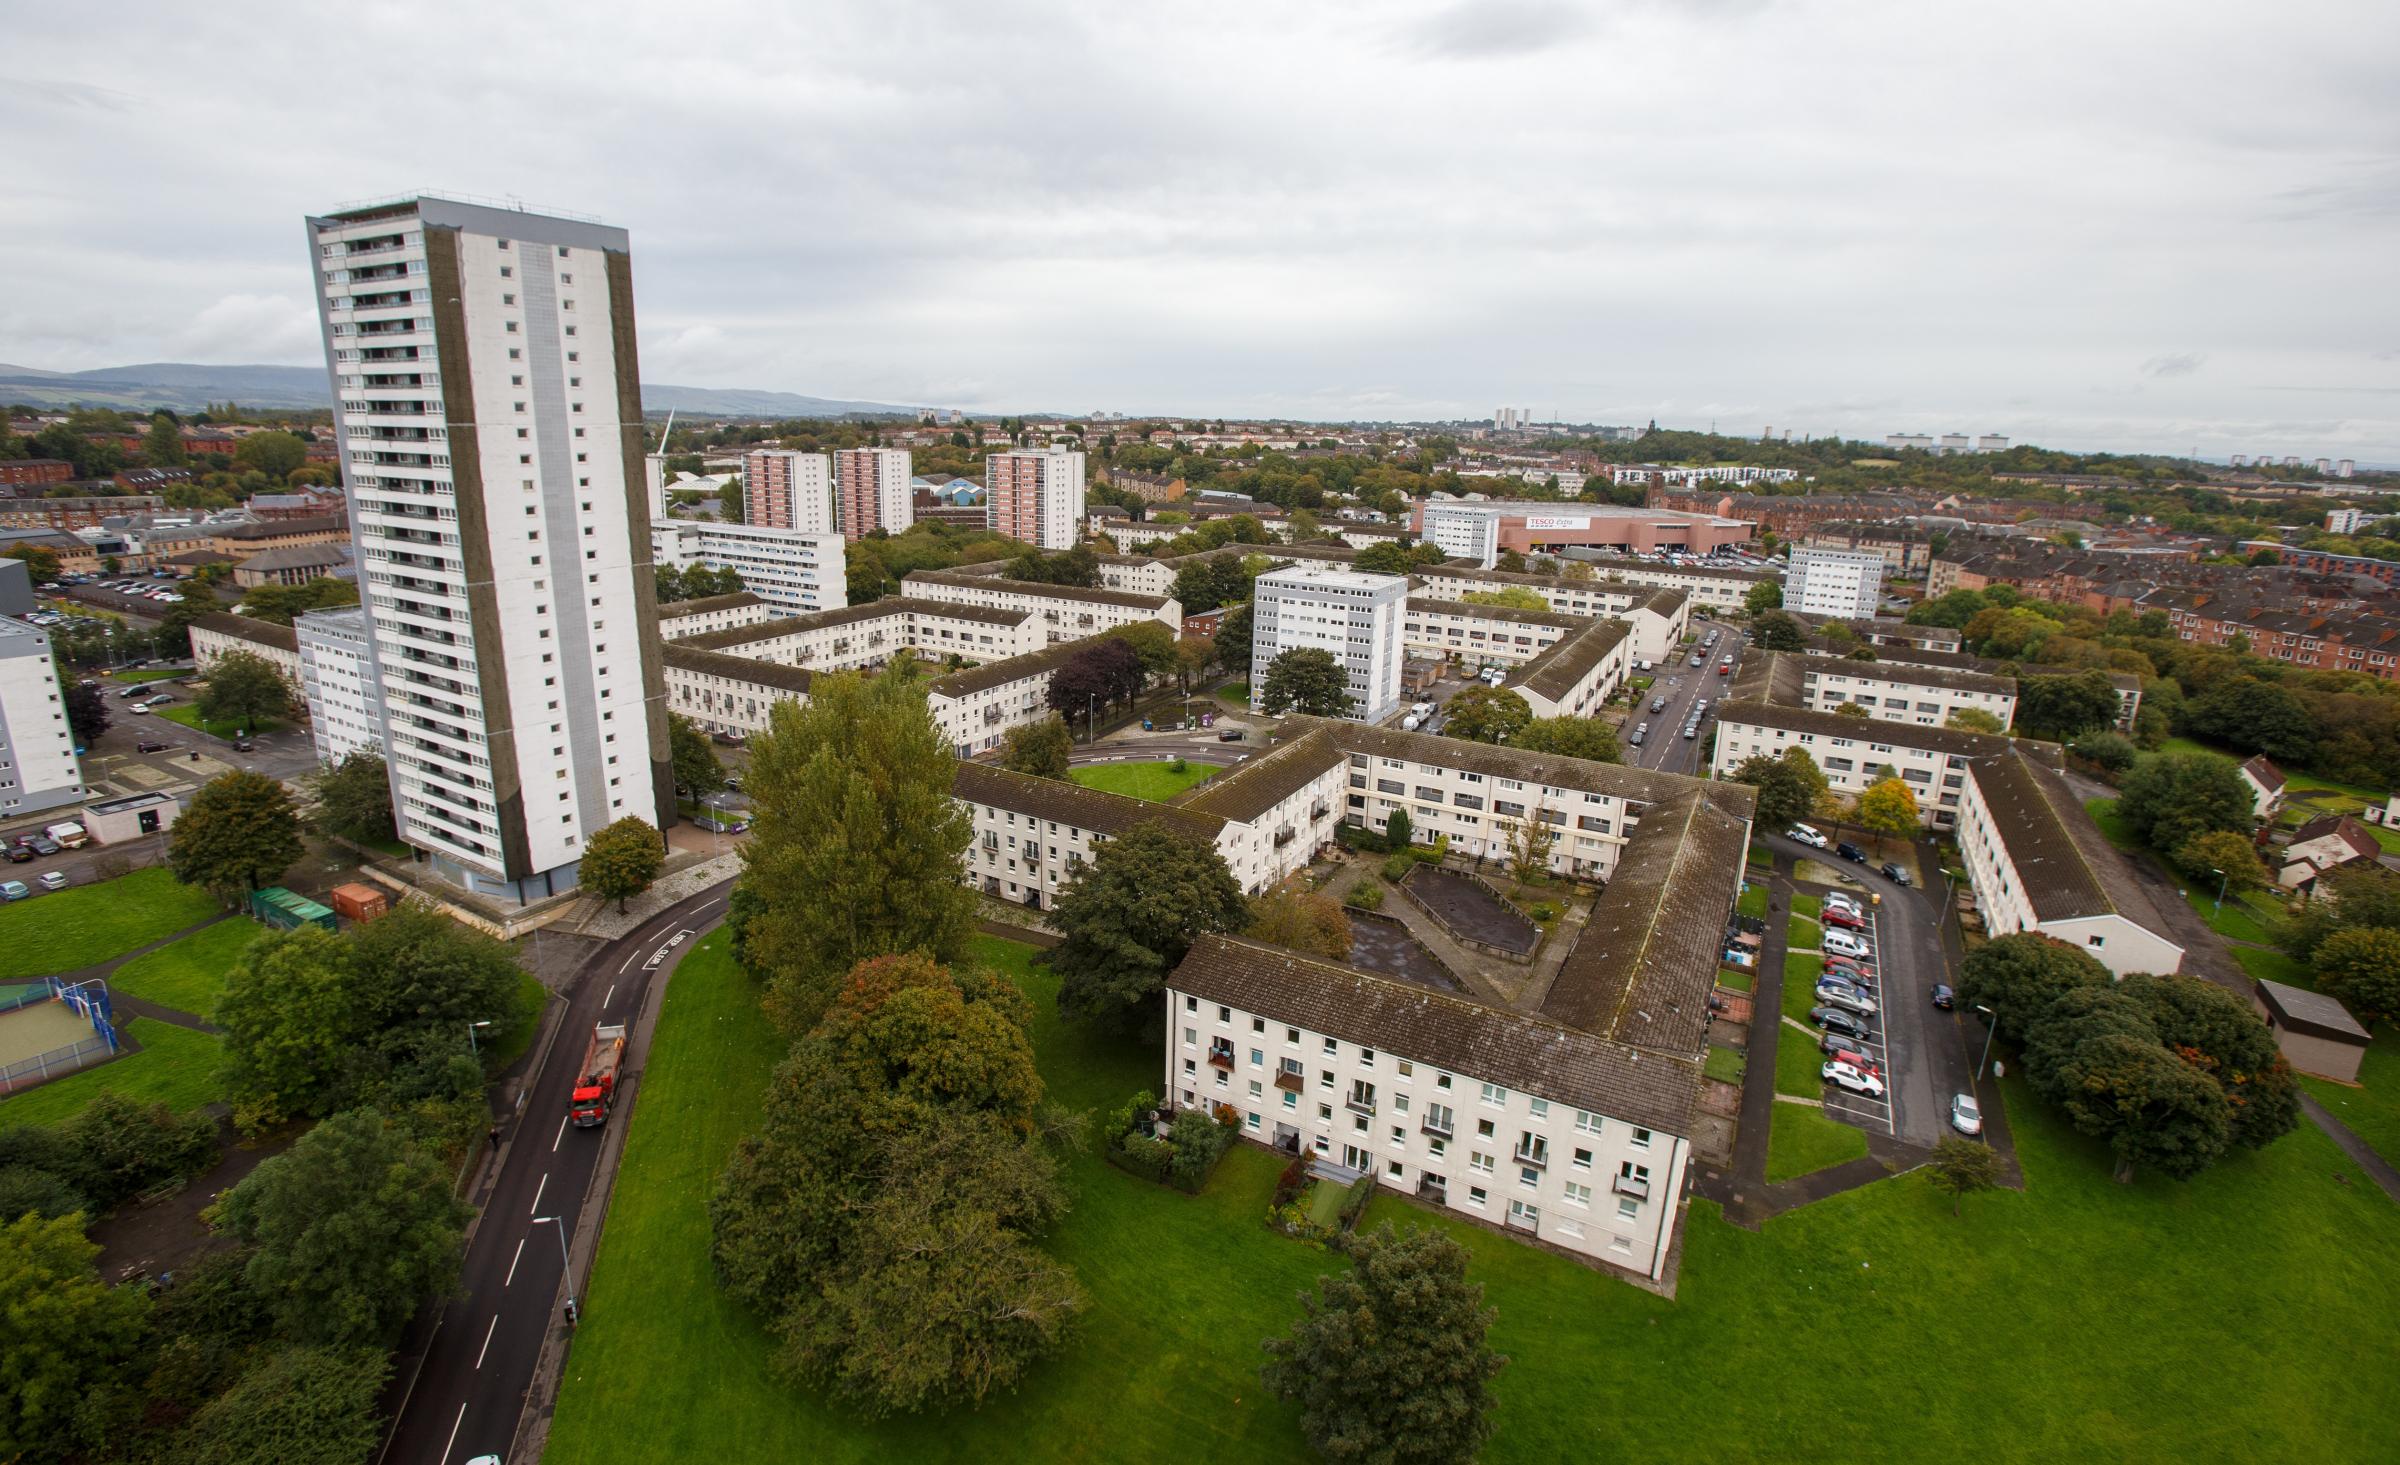 Four tower blocks in Wyndford are earmarked for demolition. Photograph by Colin Mearns.